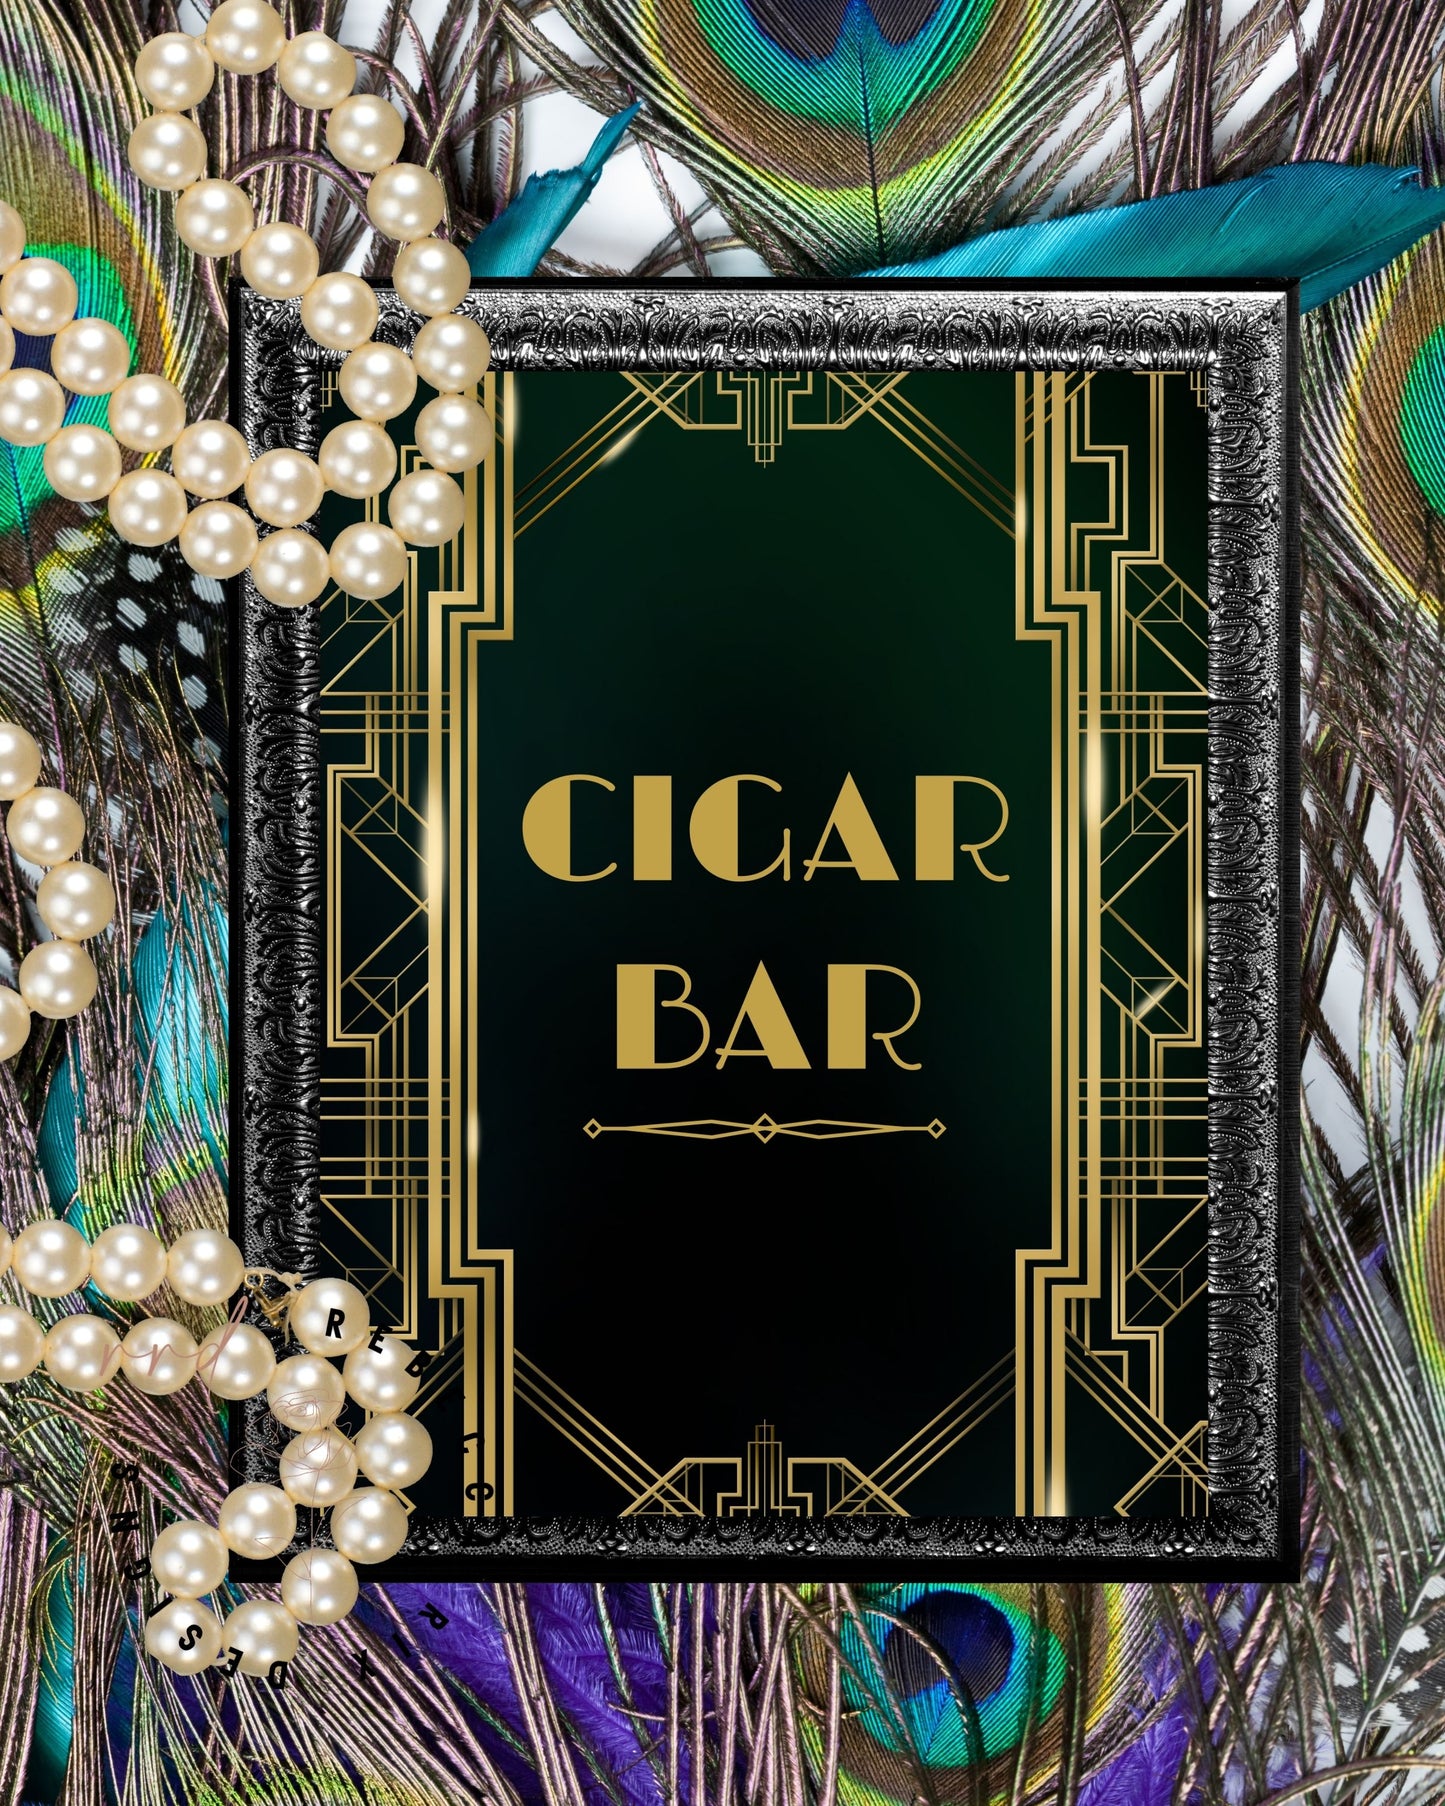 "Cigar Bar" Art Deco Printable Party Sign For Great Gatsby or Roaring 20's Party Or Wedding, Black & Gold, Printable Party Decor